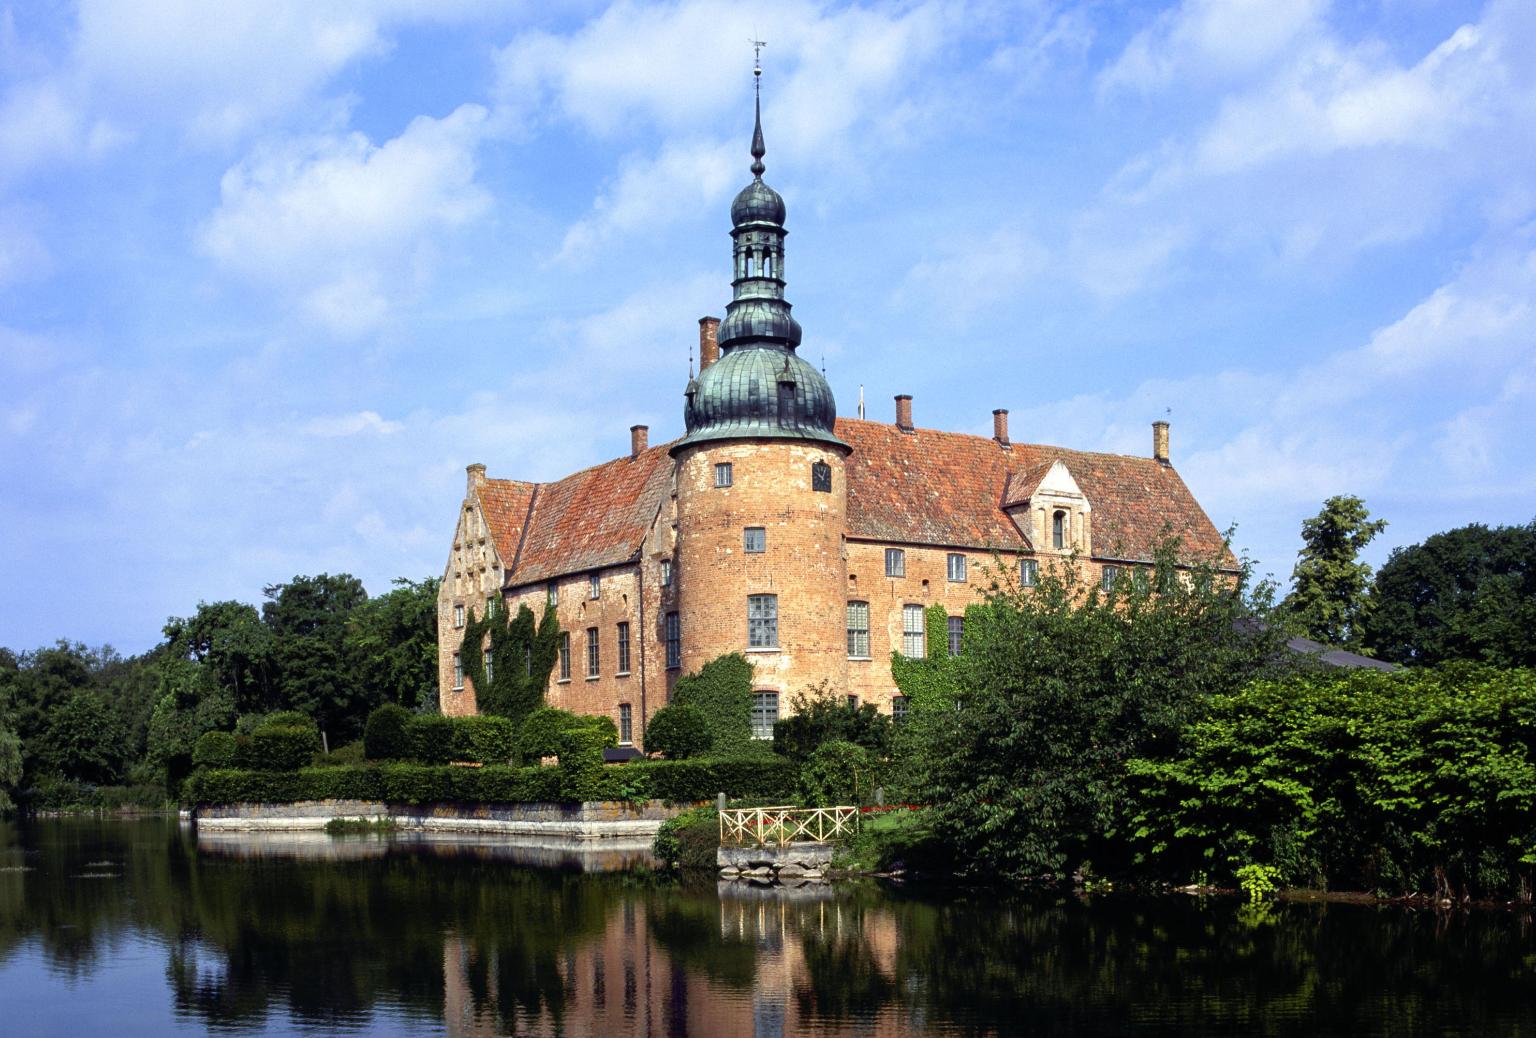 Örenäs Castle in summertime surrounded by nature and a moat